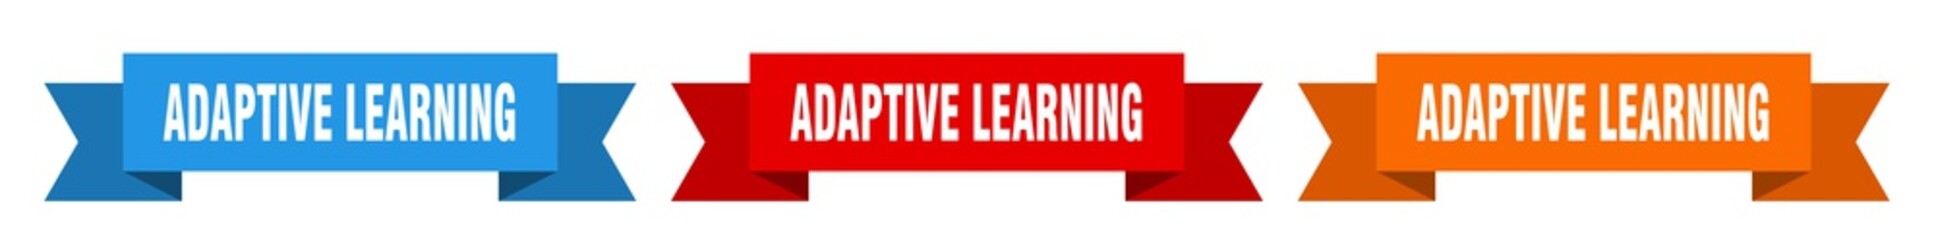 adaptive learning ribbon. adaptive learning isolated paper sign. banner